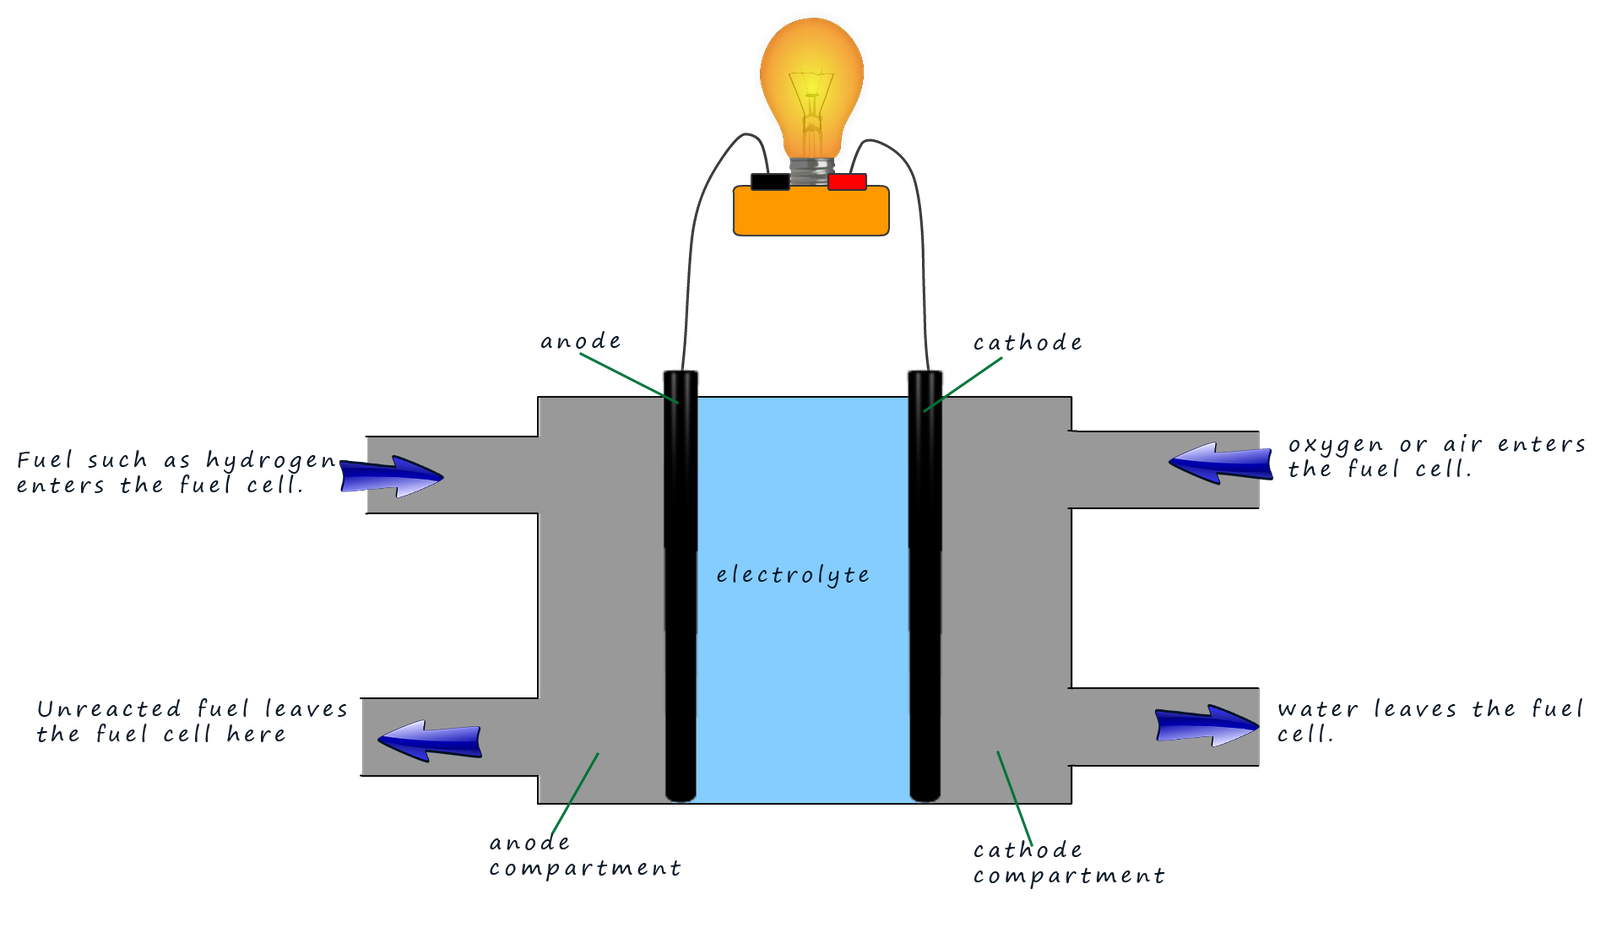 fuel cell schematic.  Simple diagram to show how a fuel cell works.